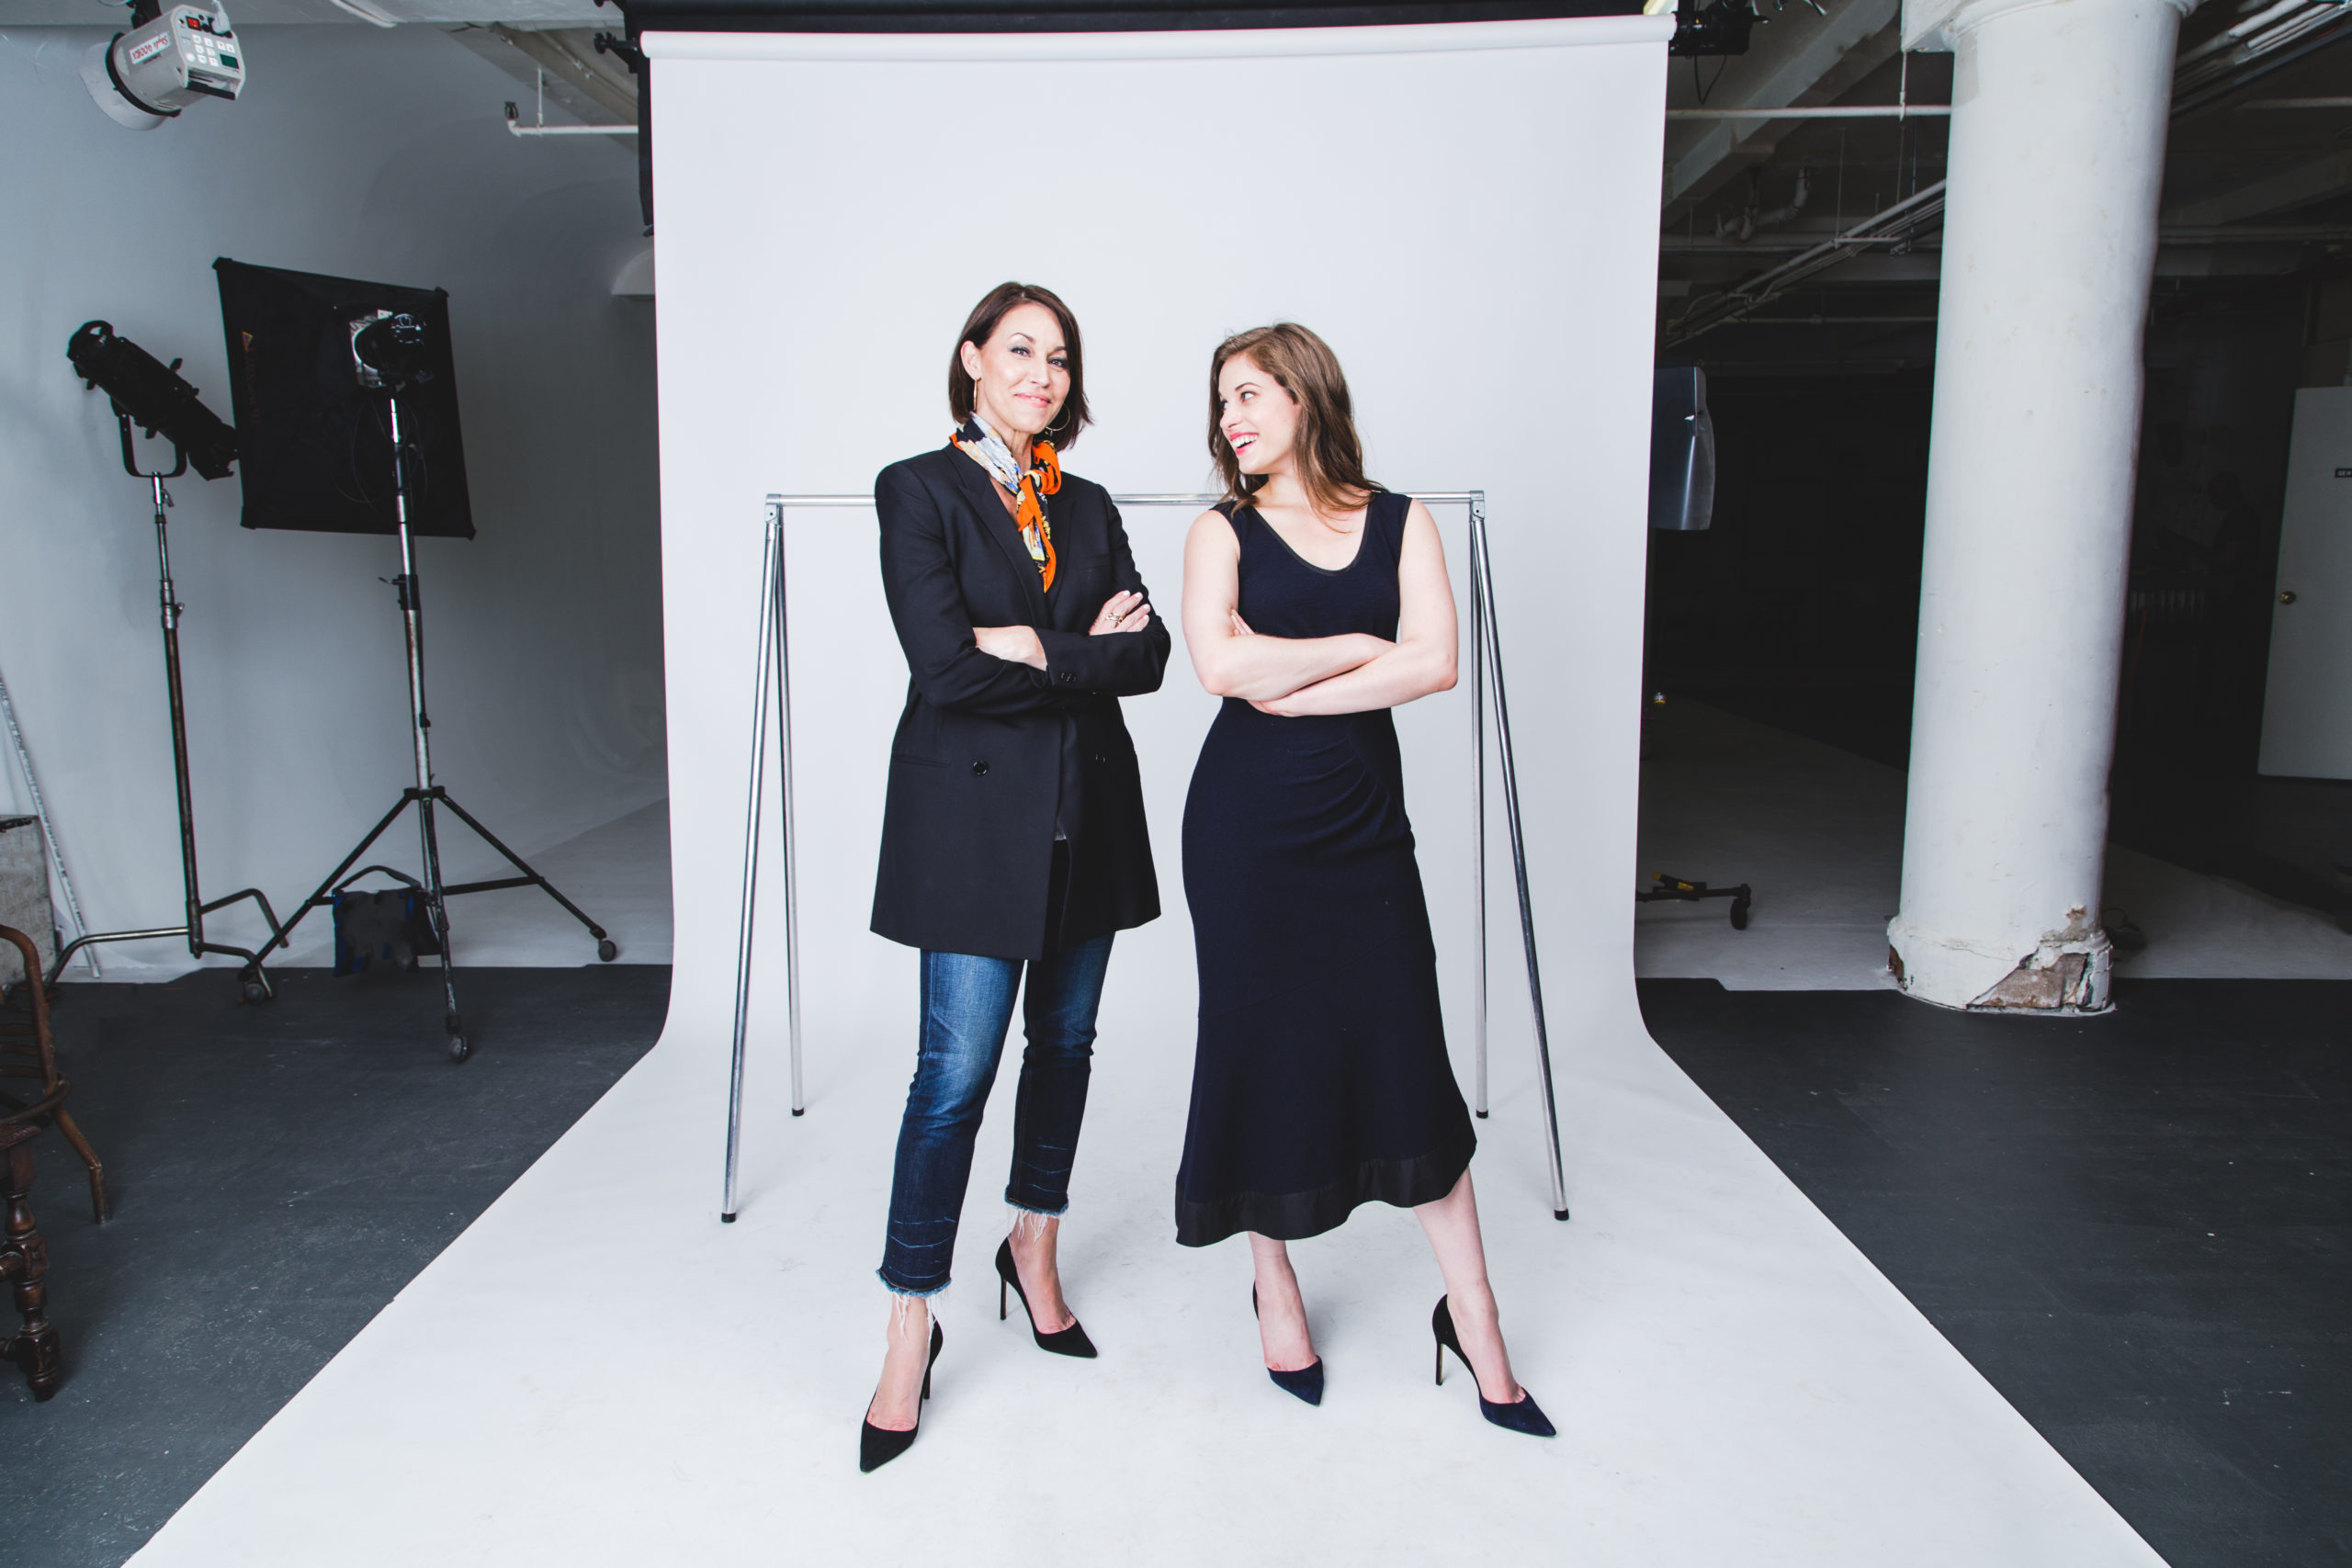 Two women standing on set in front of a clothing rack: one wearing a black blazer, jeans and black pumps; the other wearing a navy dress with navy pumps. Both have brown hair